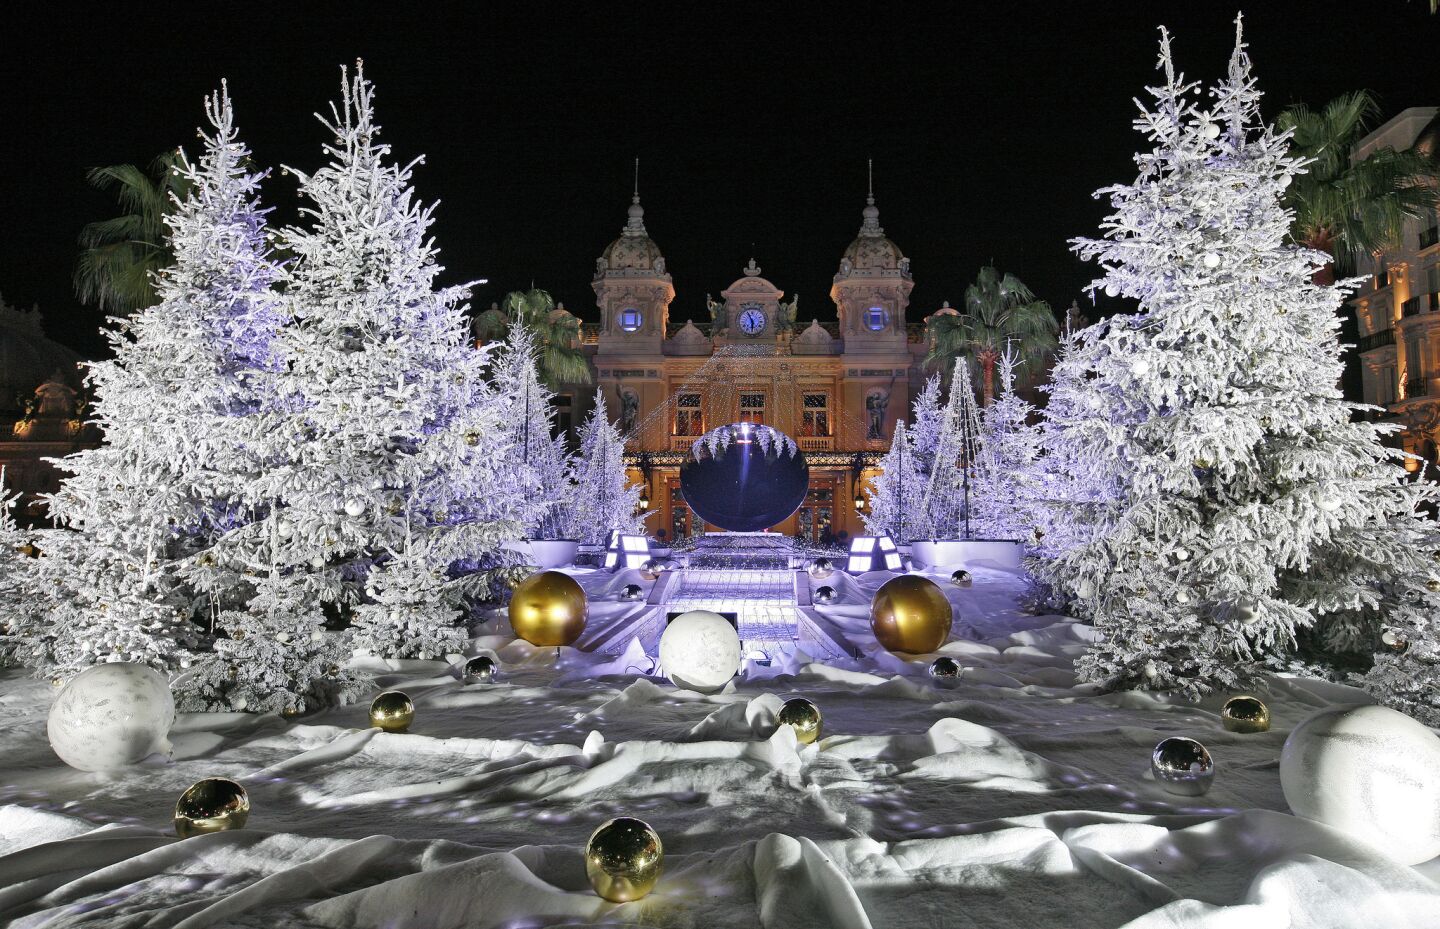 This is the snowy Christmas scene outside the Monte Carlo Casino.